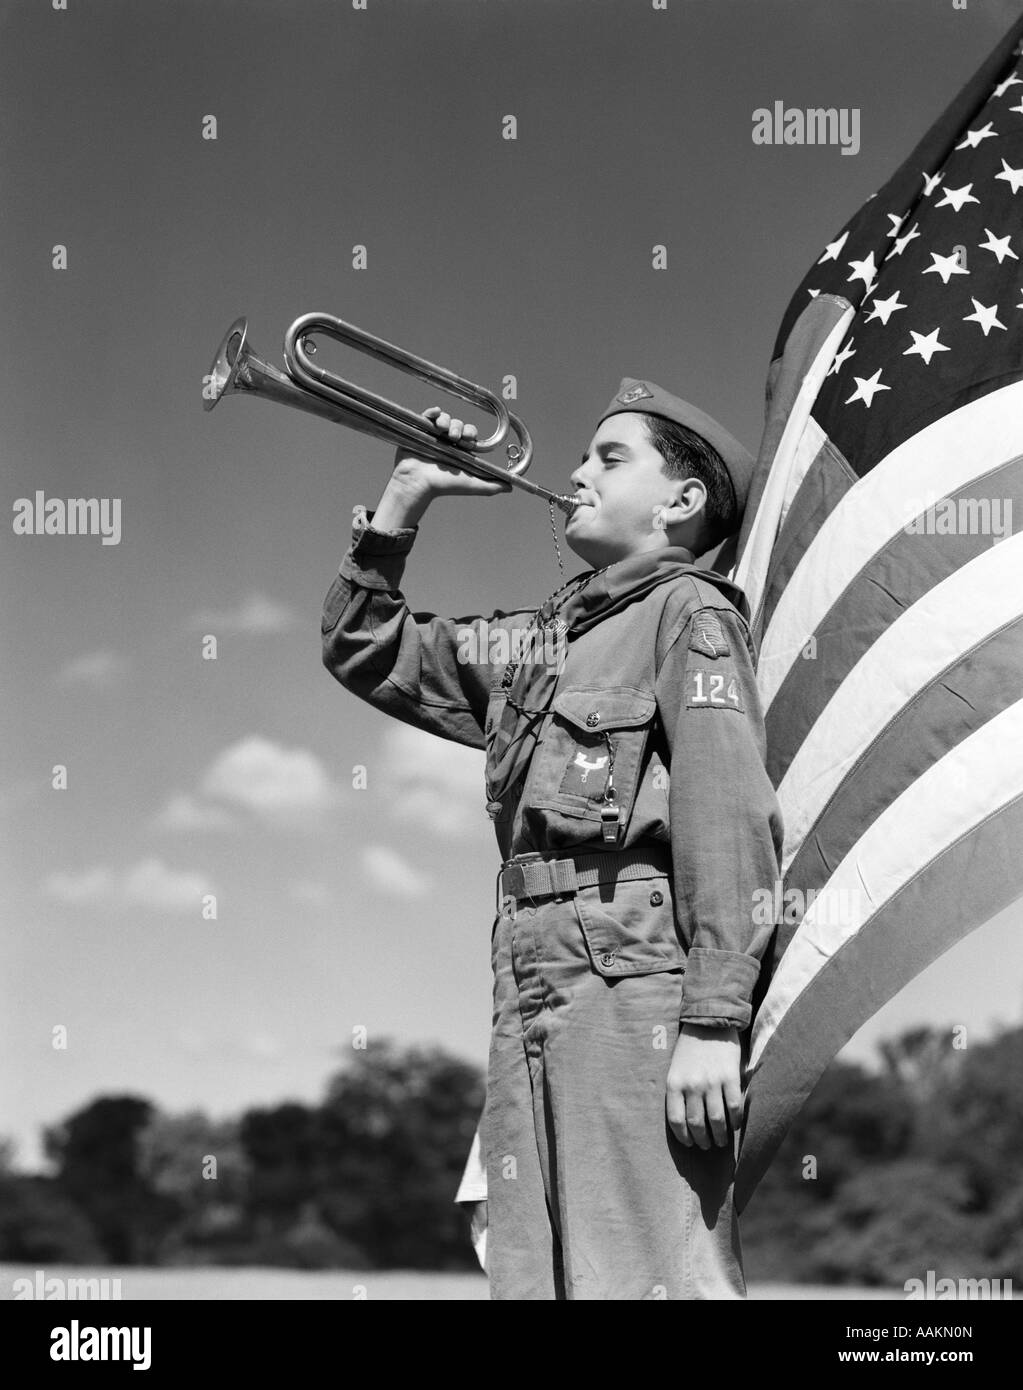 1950s PROFILE OF BOY SCOUT IN UNIFORM STANDING IN FRONT OF 48 STAR AMERICAN FLAG BLOWING BUGLE Stock Photo